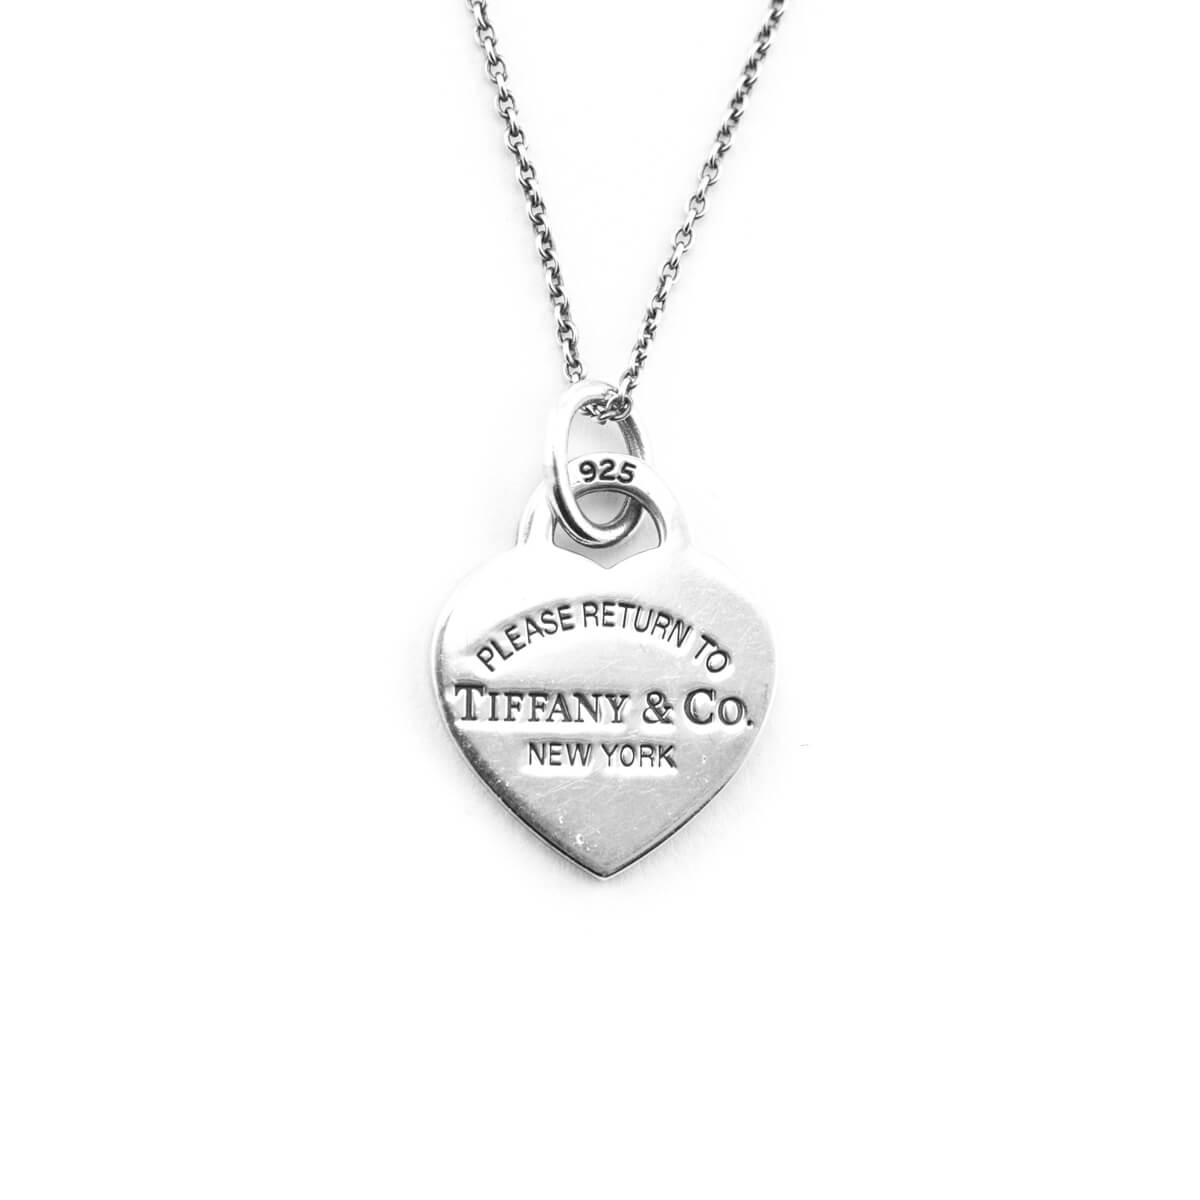 Tiffany & Co. Sterling Silver Return to Tiffany Heart Pendant Necklace